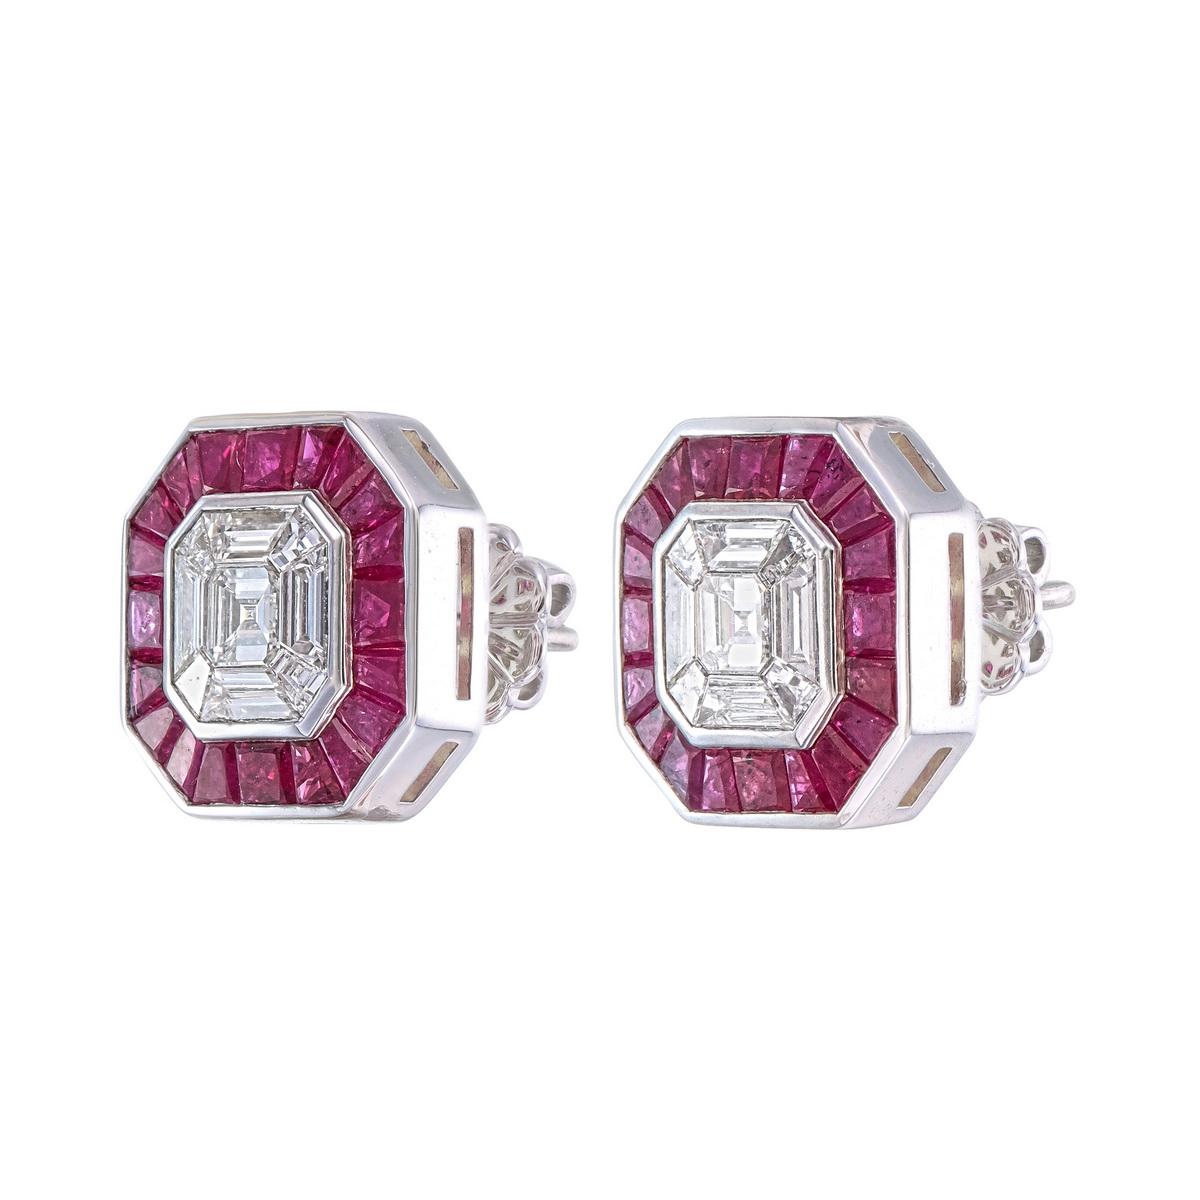 This pair of earrings is made with 0.80 carat diamonds in composite setting giving a look of 4 carat pair.
VVS clarity ,EF color diamonds are used with natural ruby halo.
Extremely light on ears 
4 carat pair of Asscher cut diamonds are worth over 